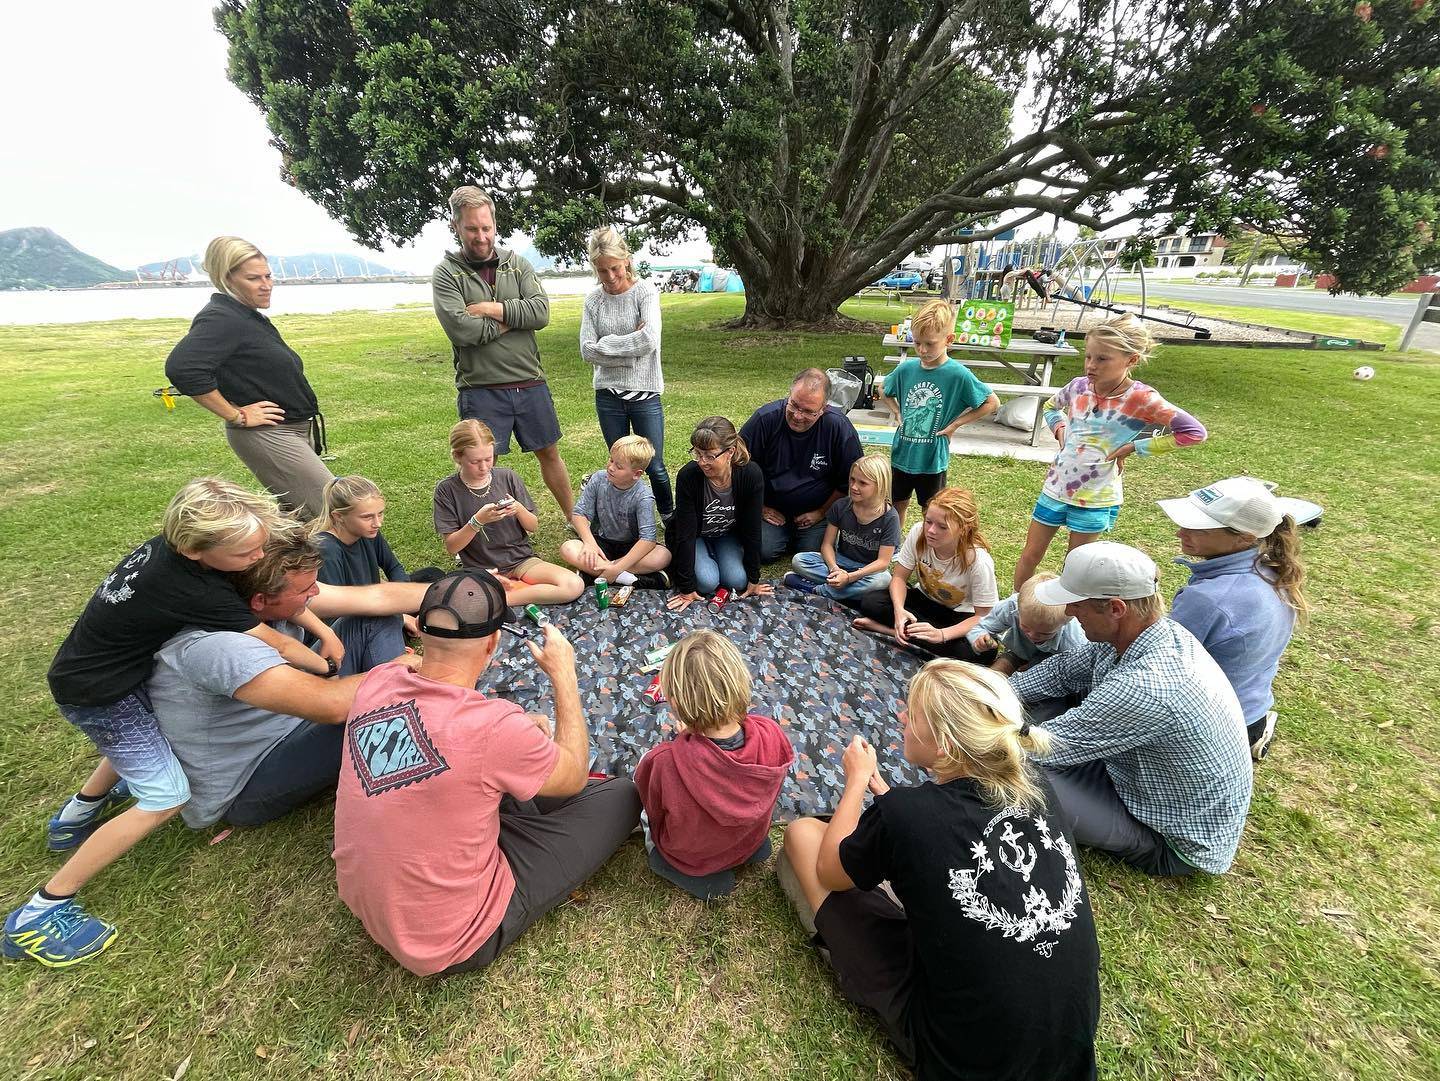 Large group uses the meadow mat for lunch, snacks, and card games. Shown in Urban Camo on an island near a marina.